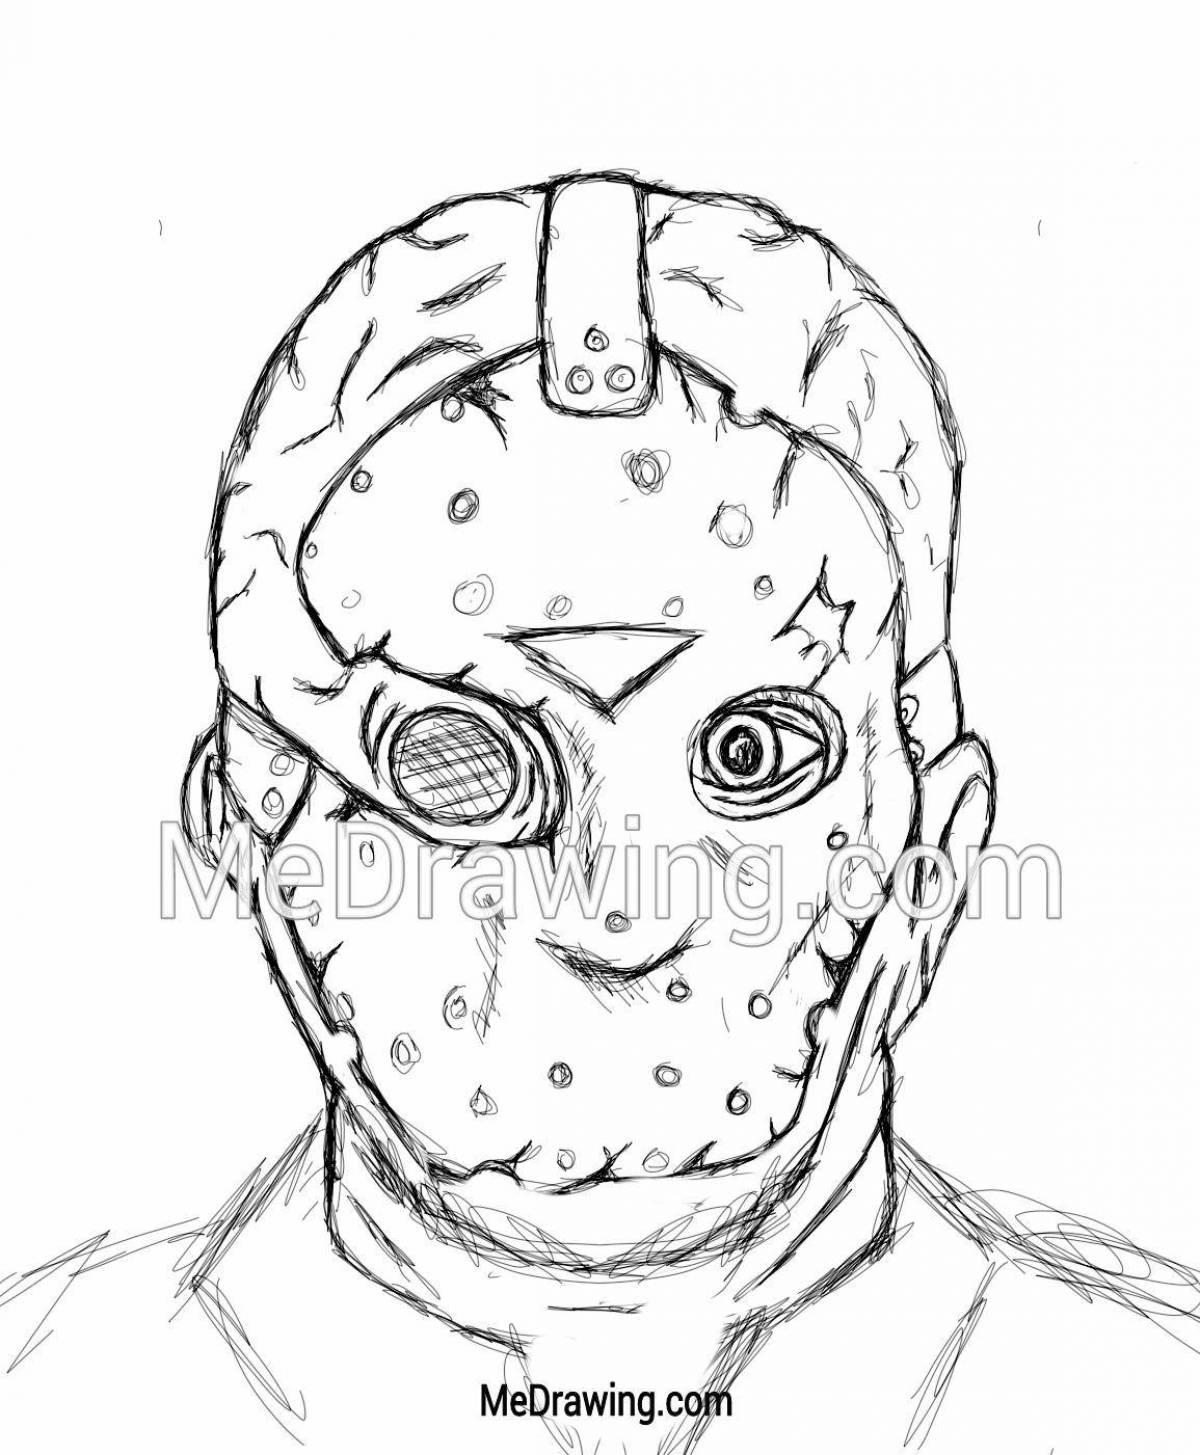 Cold Friday the 13th coloring page